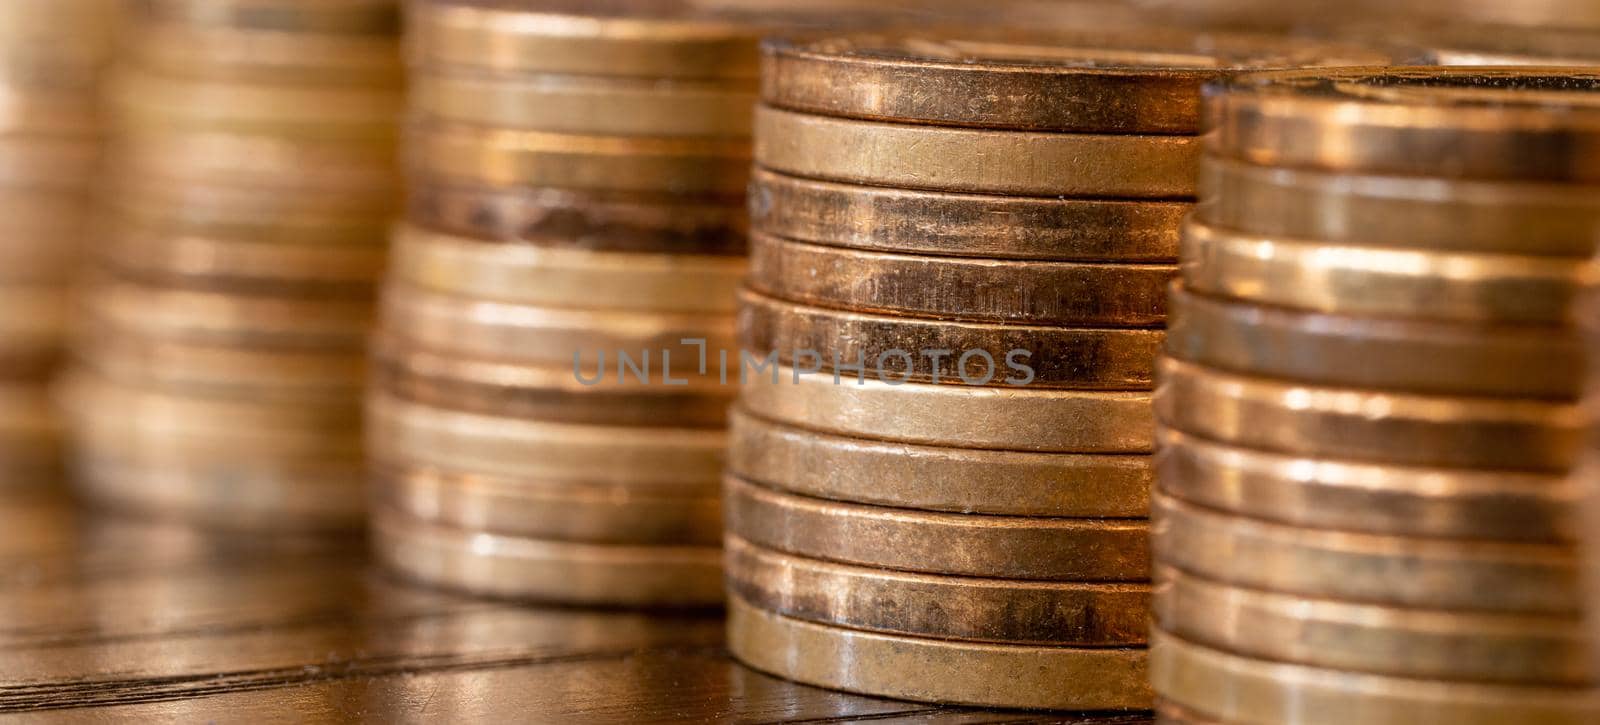 Banner with piles of coins on the table. Coins side view. Coins macro shot.